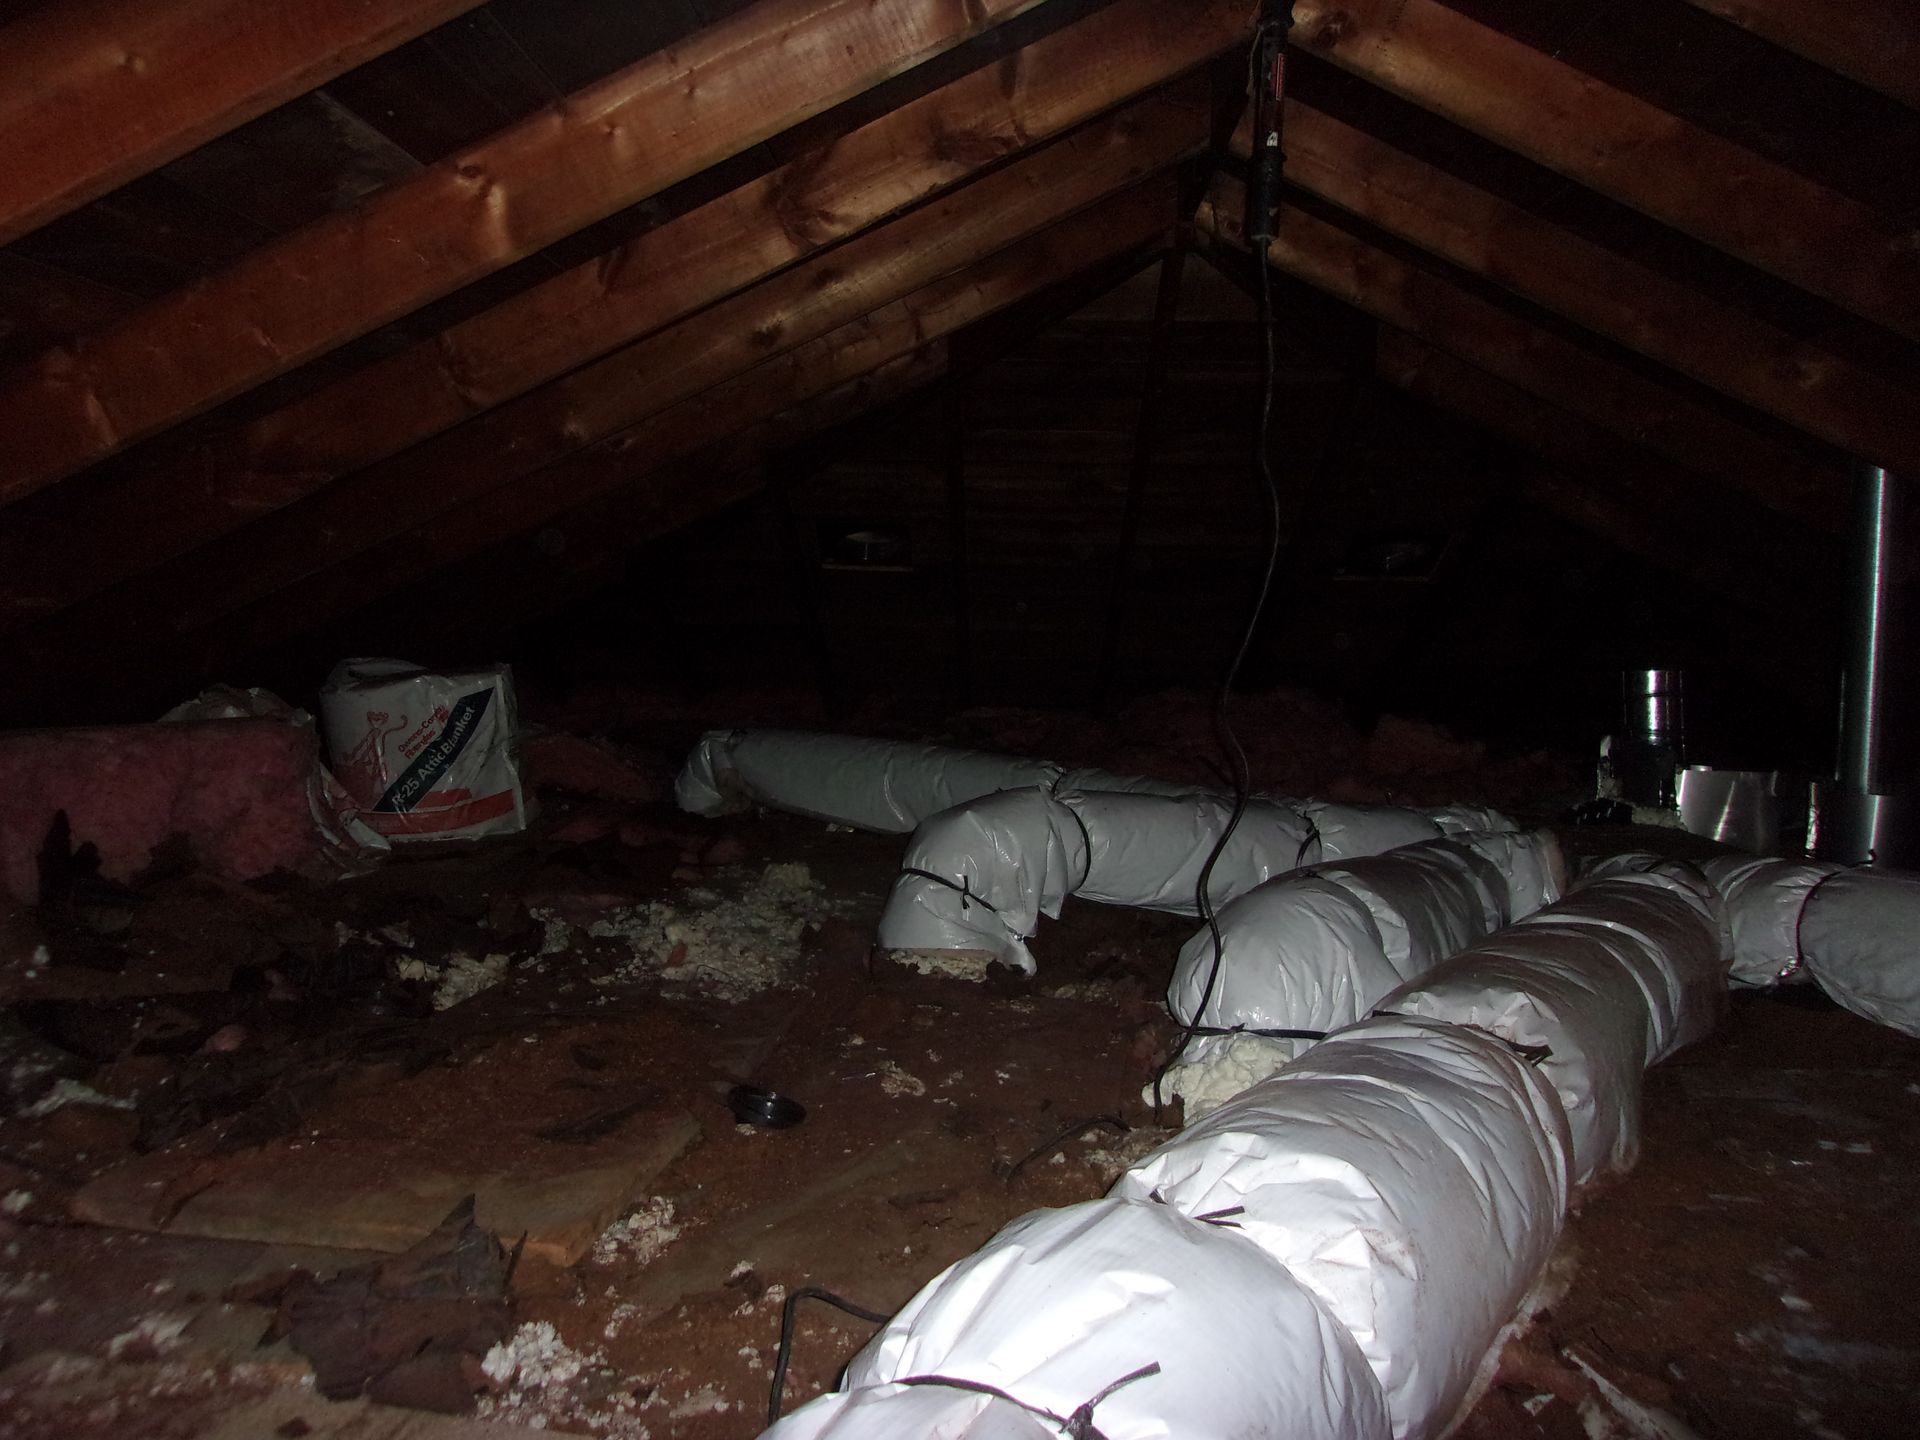 Attic space with severely damaged and moldy fiberglass insulation